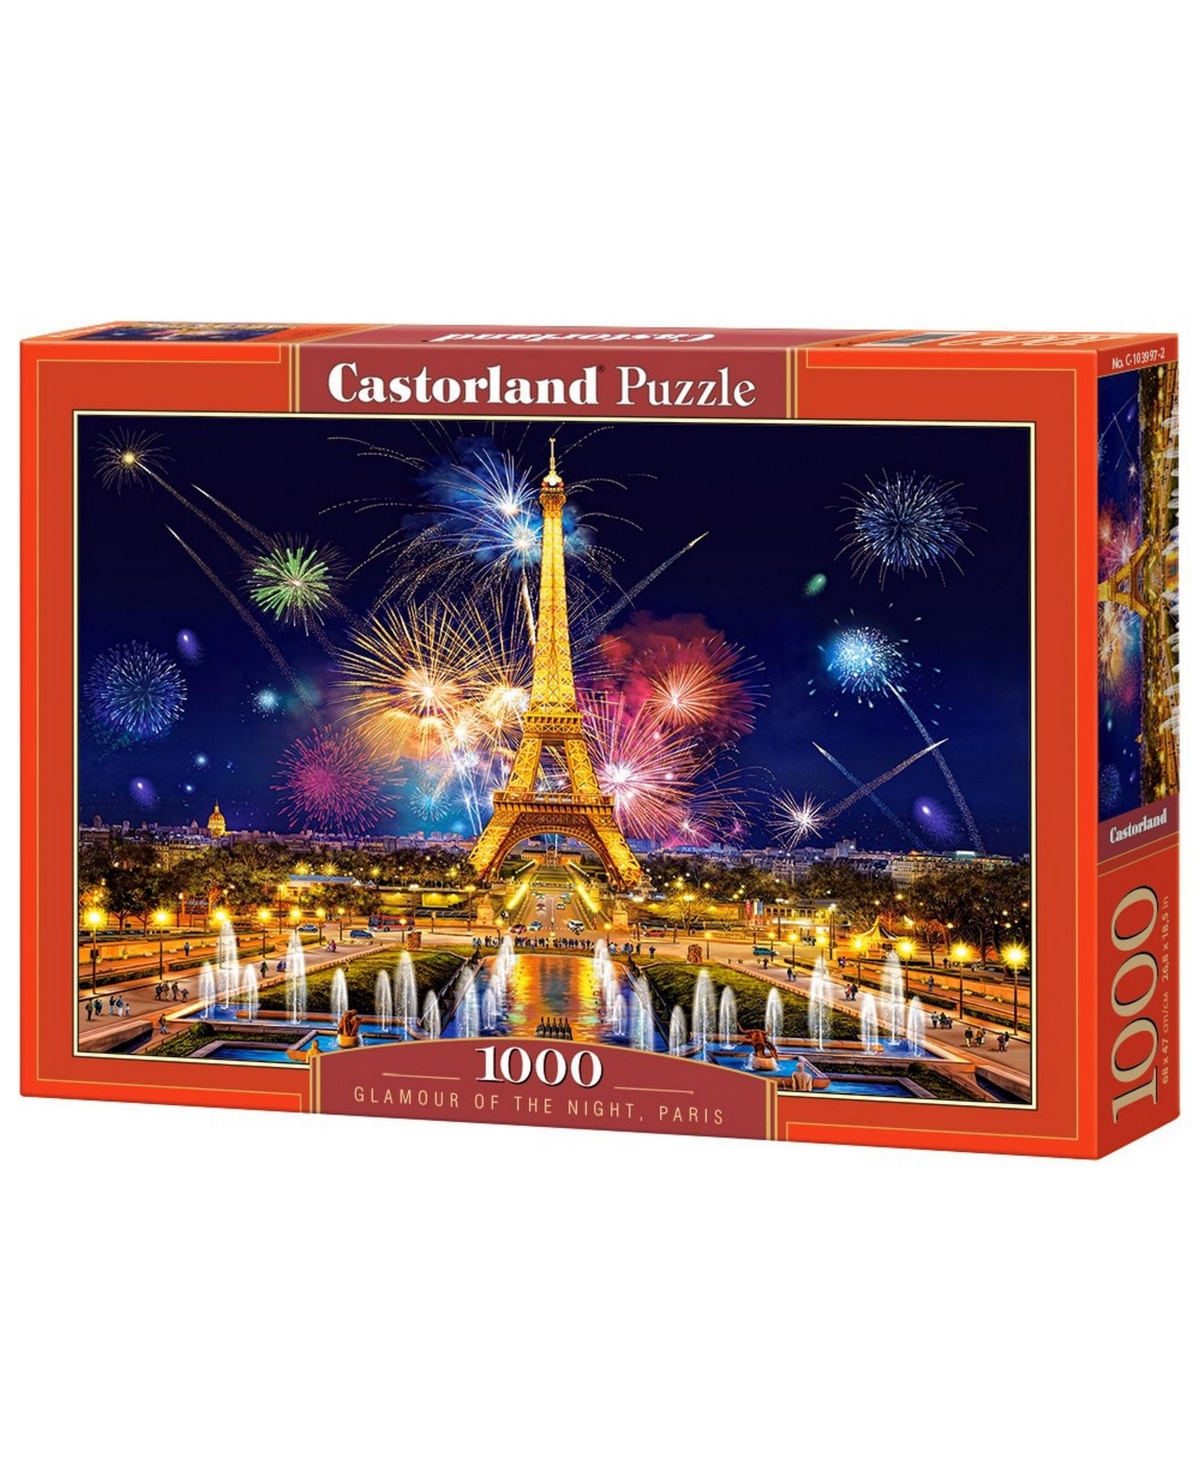 Castorland Kids' Glamour Of The Night, Paris Jigsaw Puzzle Set, 1000 Piece In Multicolor